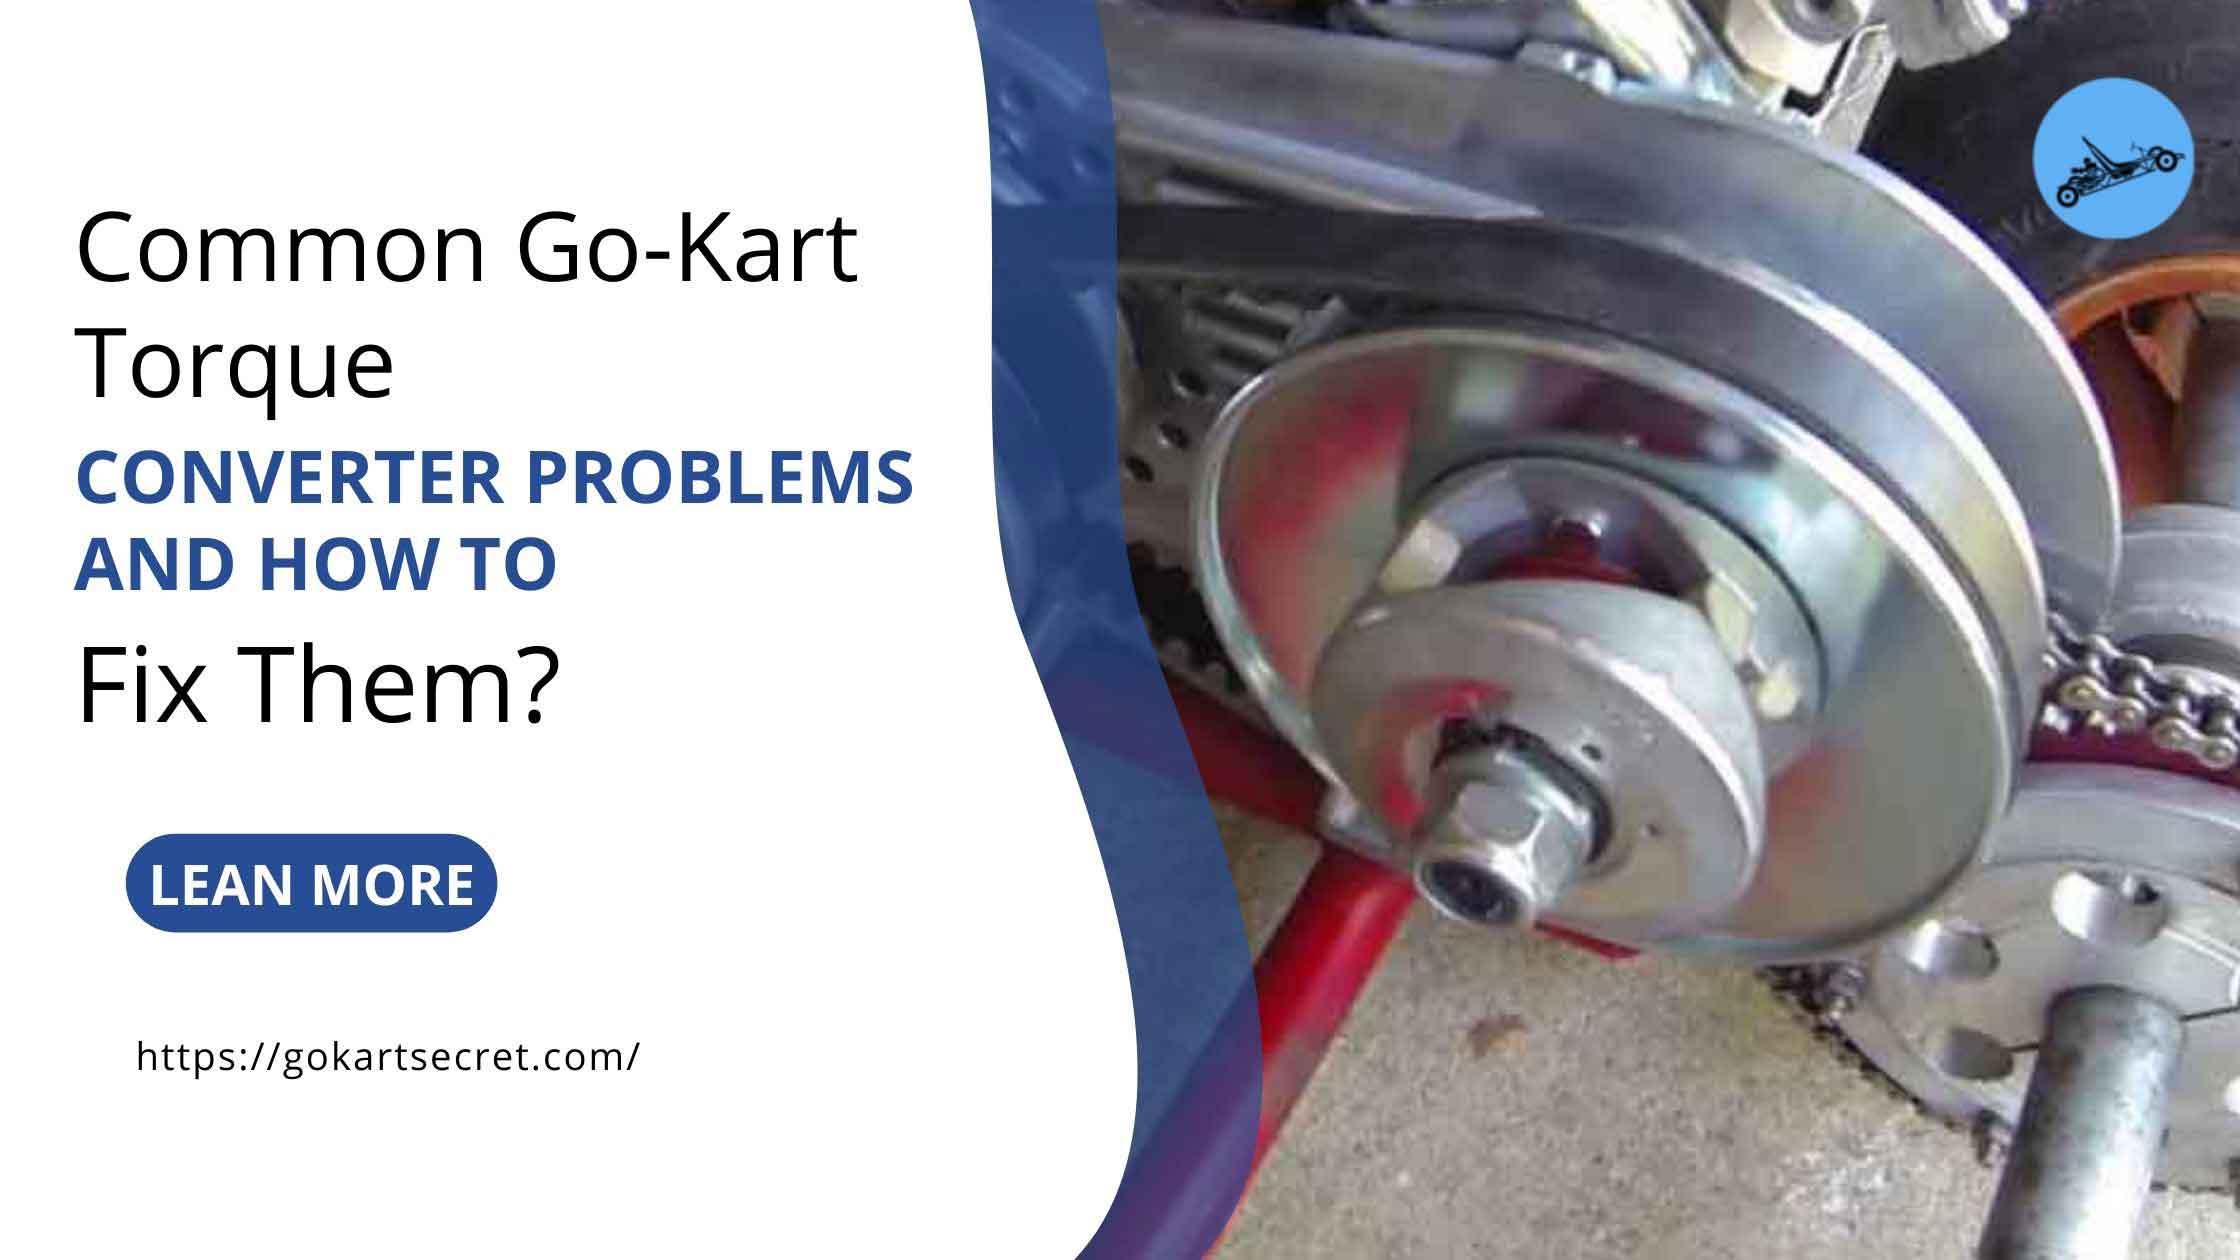 Common Go-Kart Torque Converter Problems And How To Fix Them